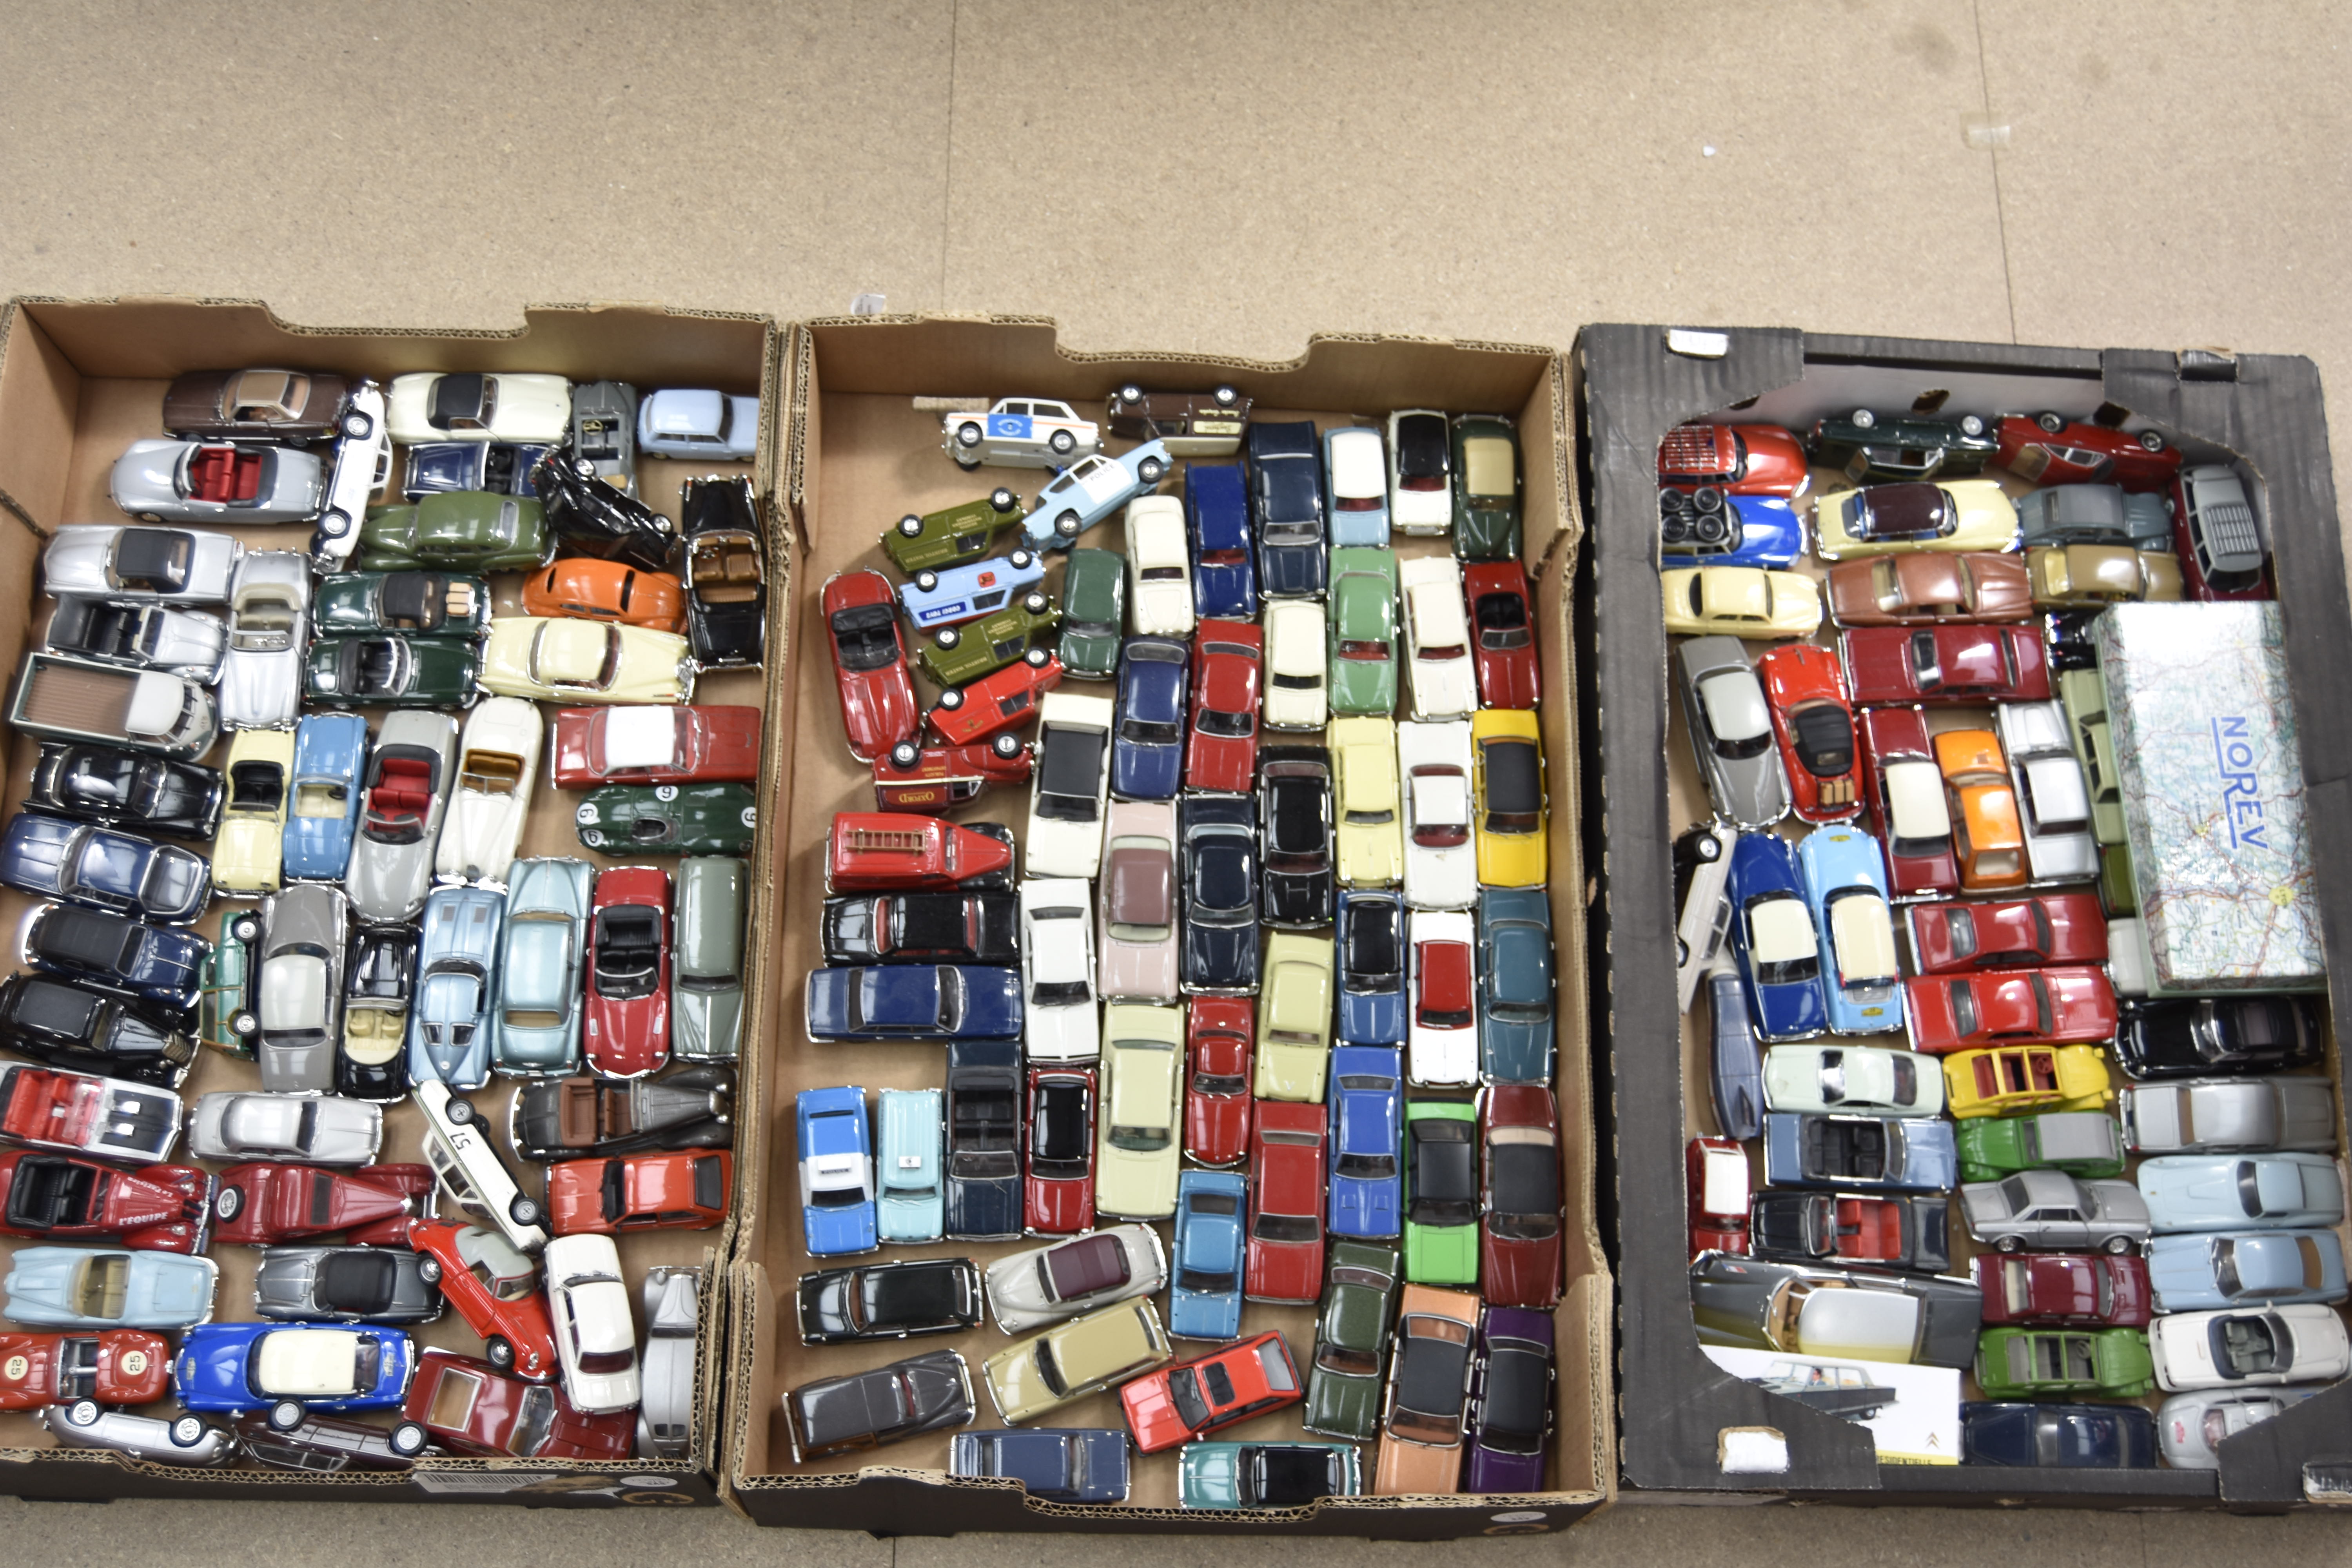 Unboxed Modern Diecast Cars, a collection of vintage cars mainly European including examples By